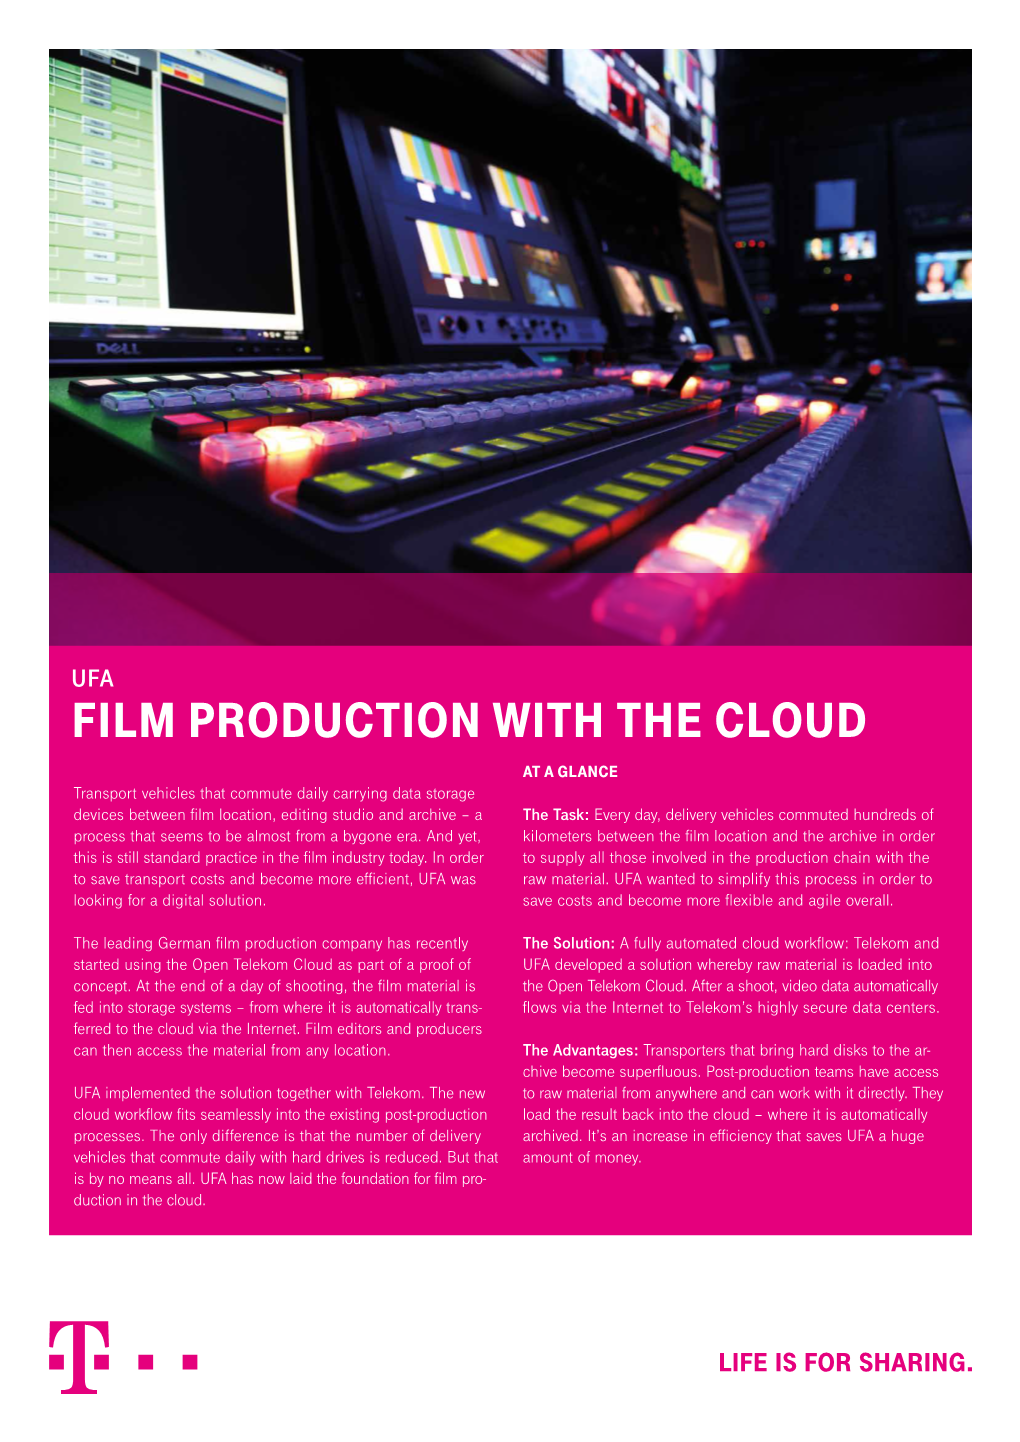 Film Production with the Cloud